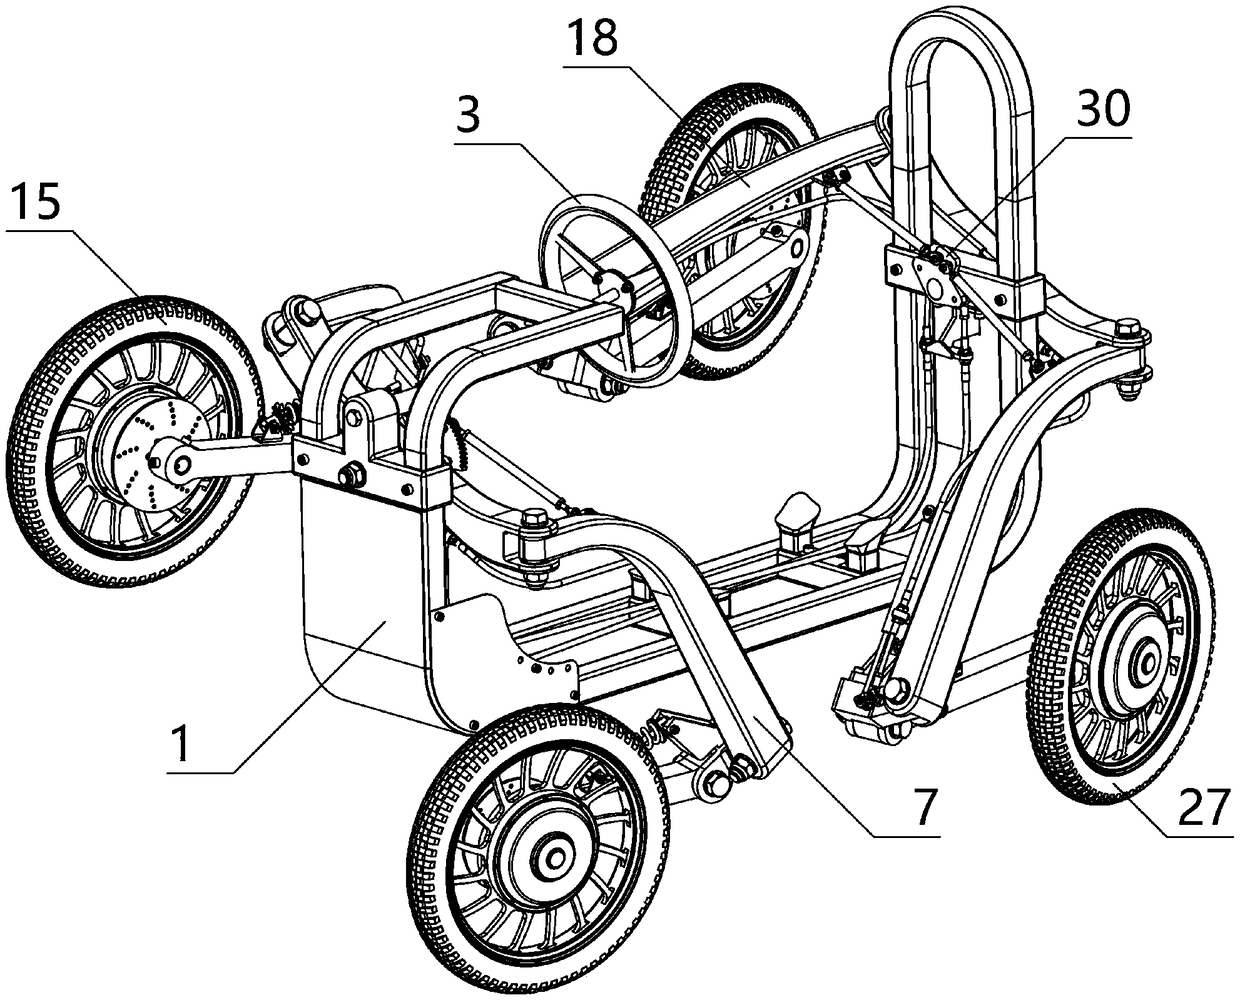 A four-wheel-drive off-road vehicle with a wheel adjustment linkage